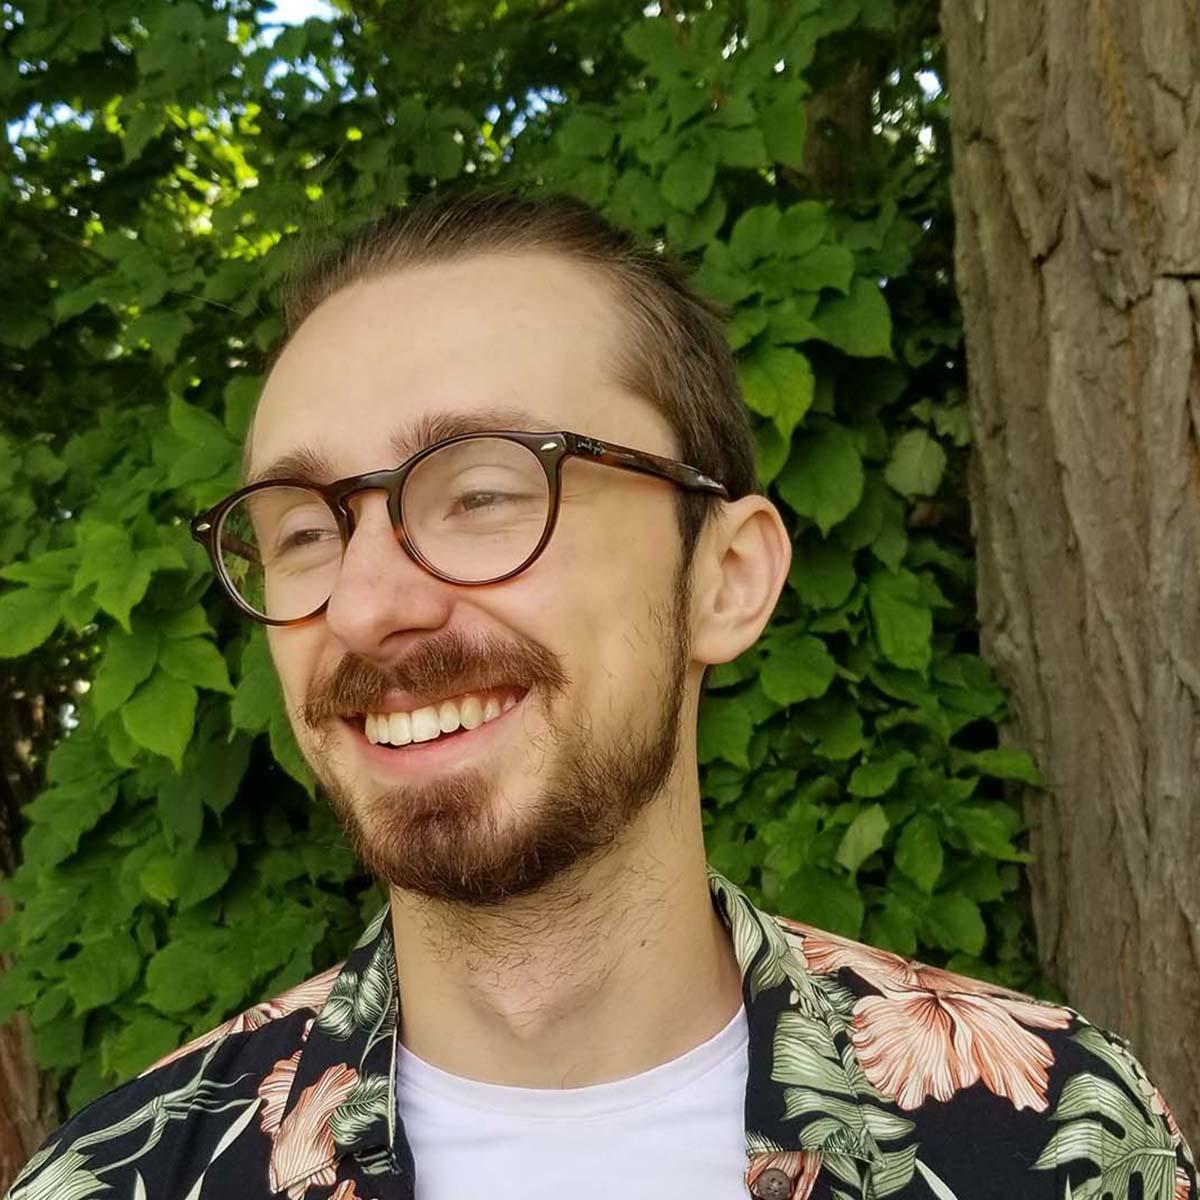 Photo of Carson Custer, a young white man with glasses and a bright floral shirt, smiling in front of greenery